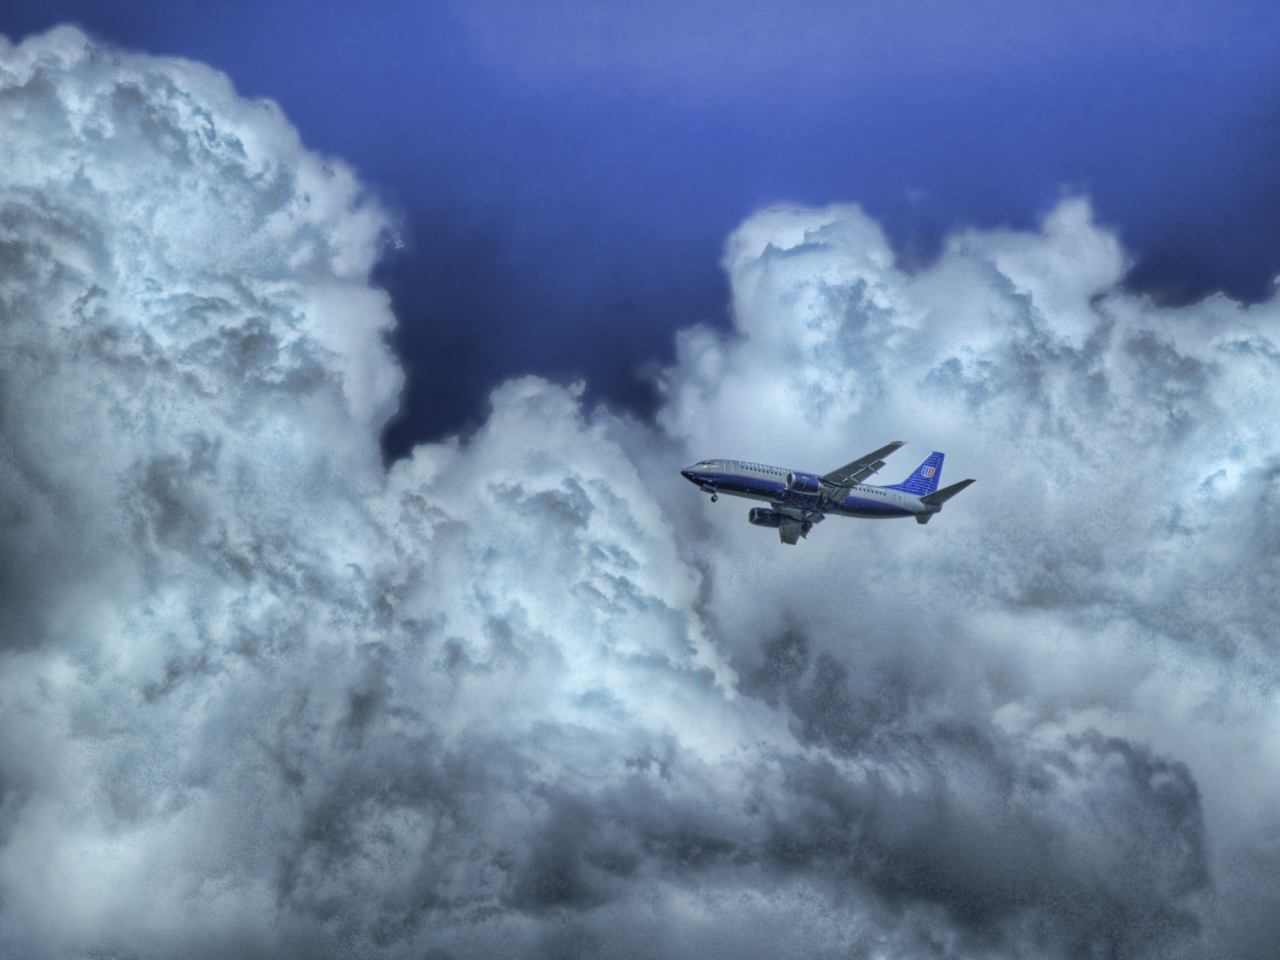 Airplane In Clouds wallpaper 1280x960